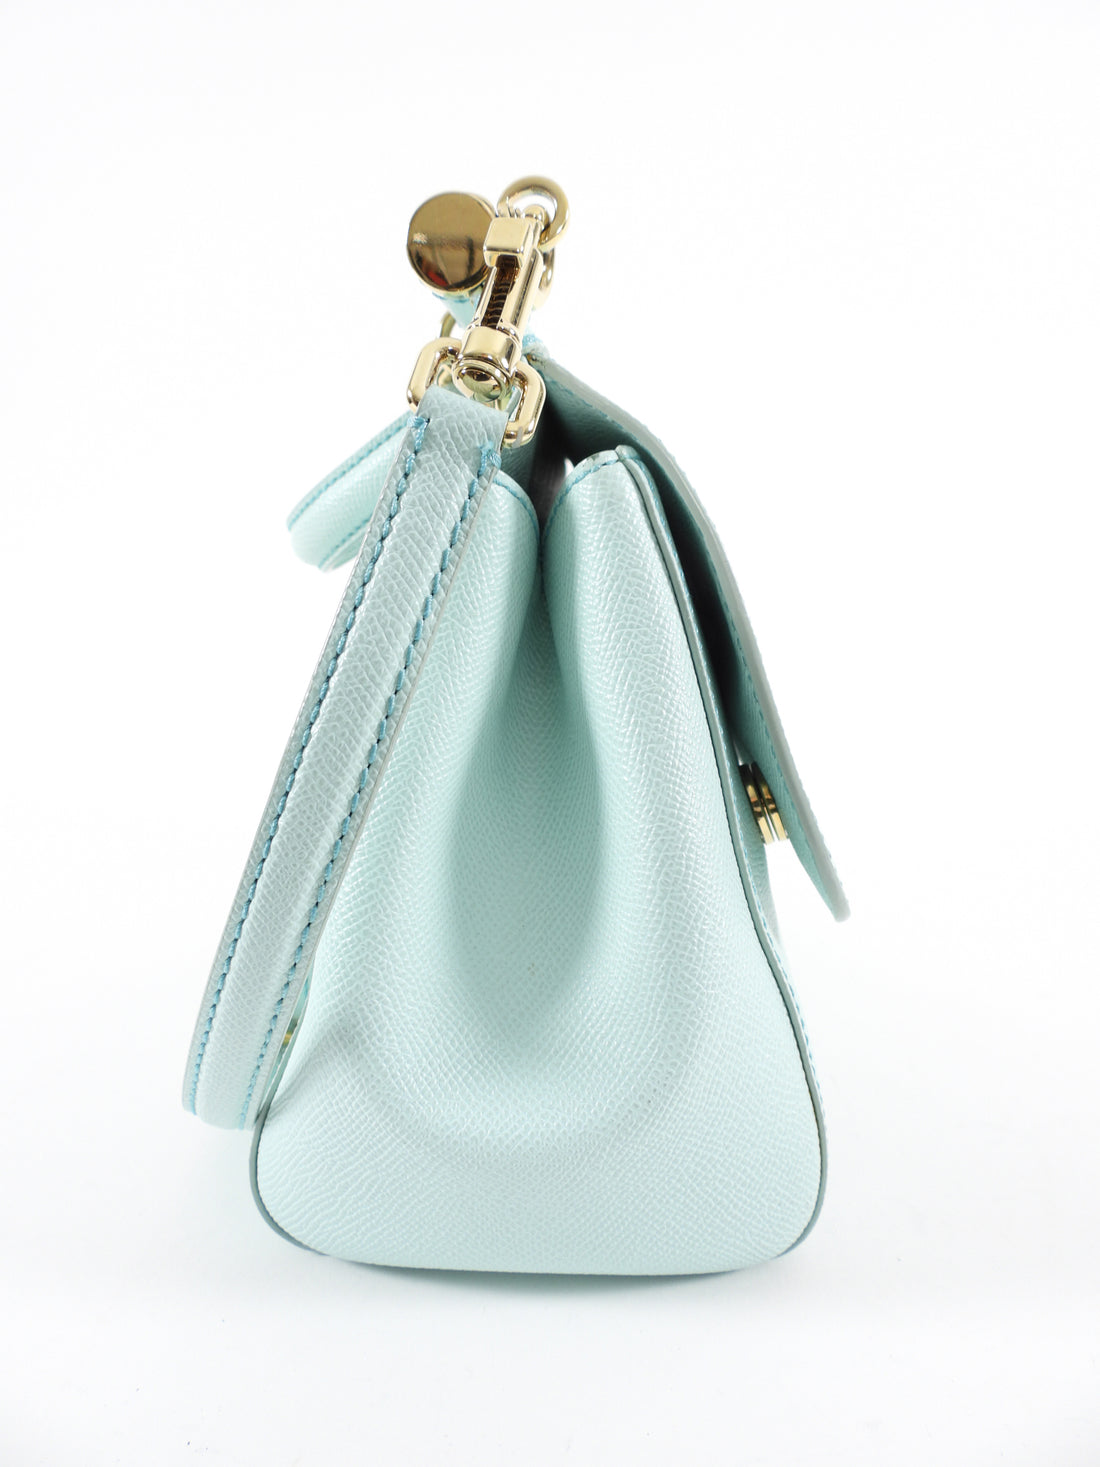 Dolce & Gabbana Turquoise Leather Small Miss Sicily Top Handle Bag